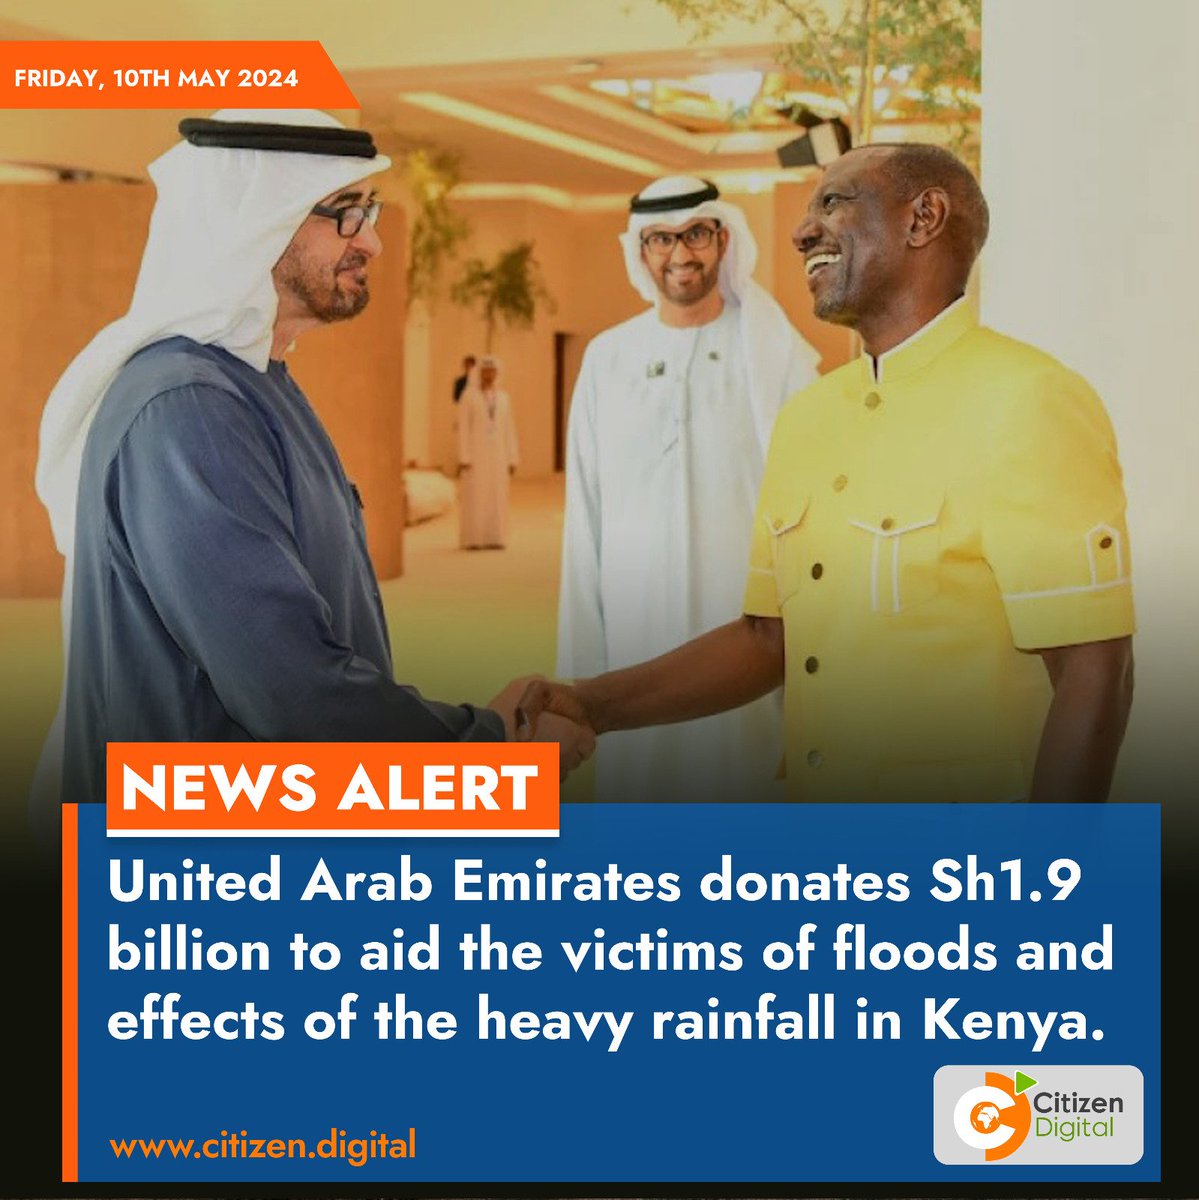 United Arab Emirates donates Sh1.9 billion to aid the victims of floods and effects of the heavy rainfall in Kenya.